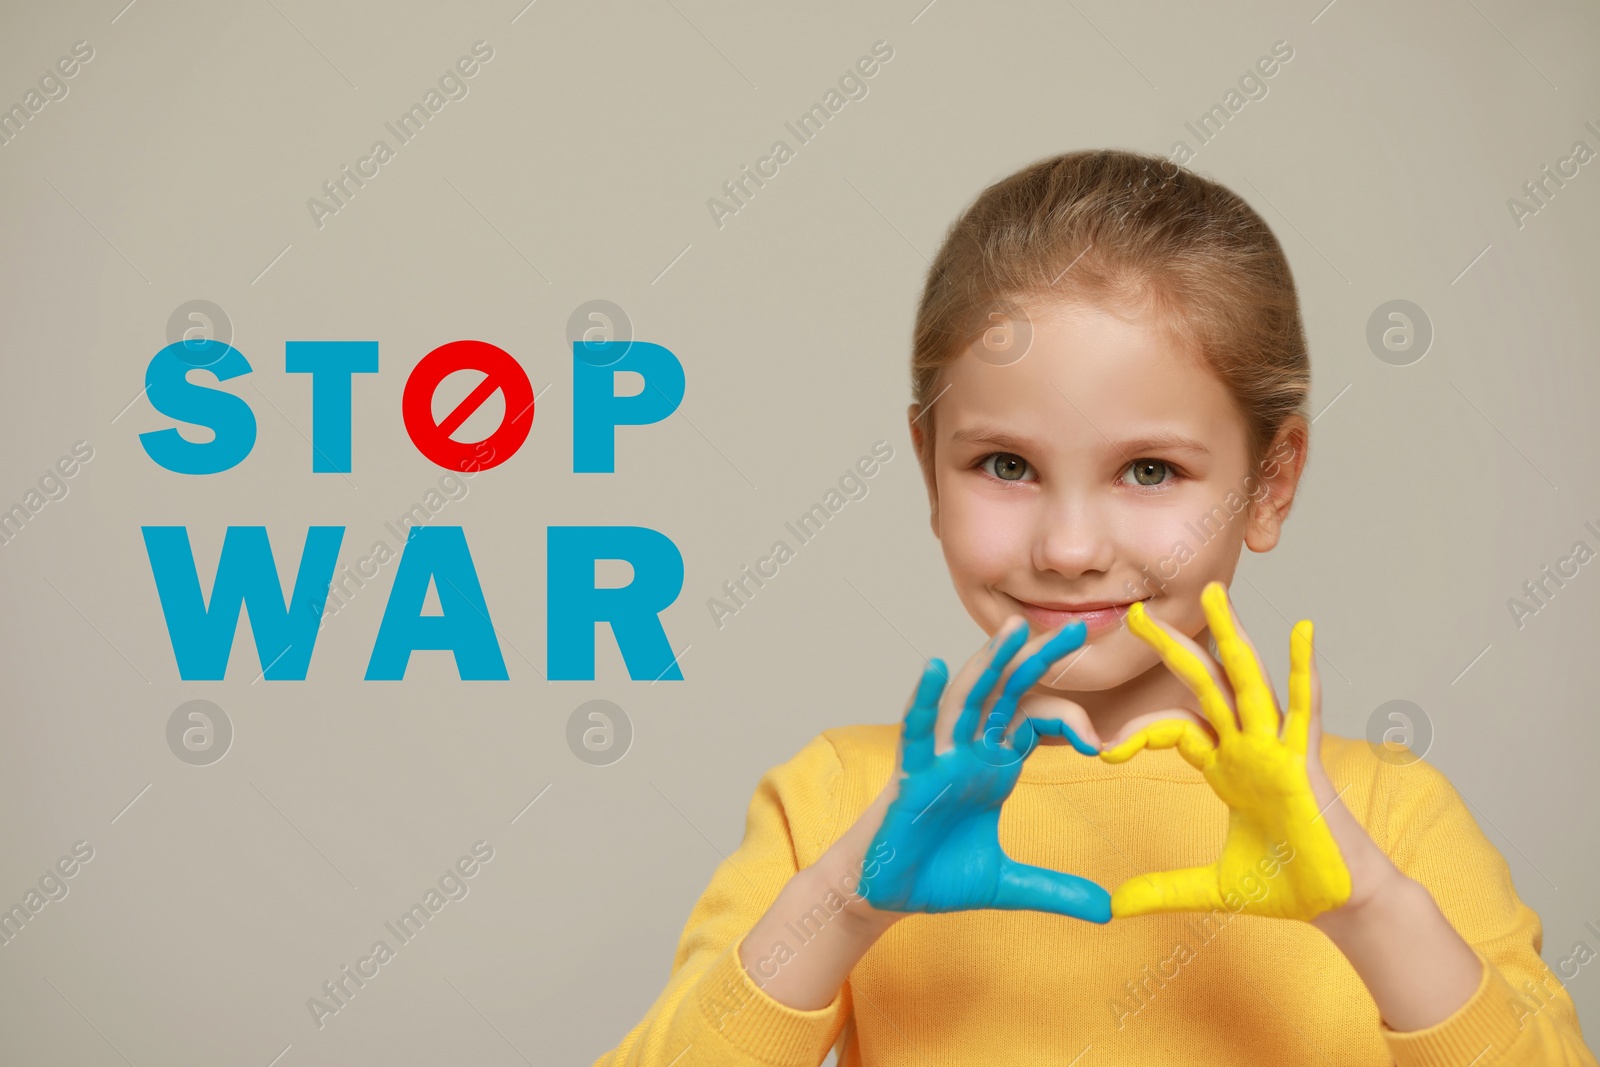 Image of Stop war. Little girl making heart with her hands painted in colors of Ukrainian flag on light background